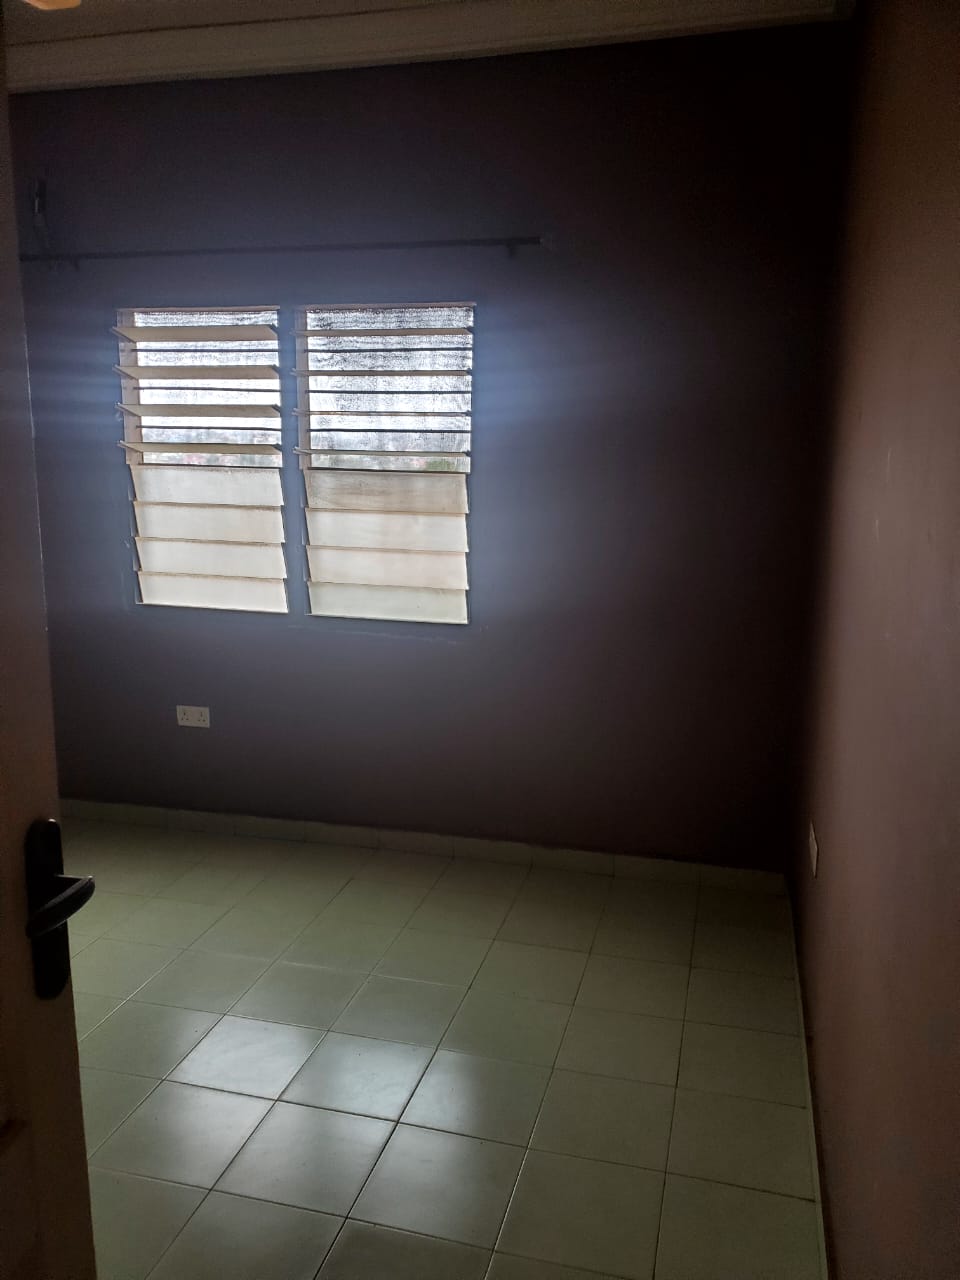 Two (2) Bedroom Unfurnished Apartment for Rent in Antie Aku